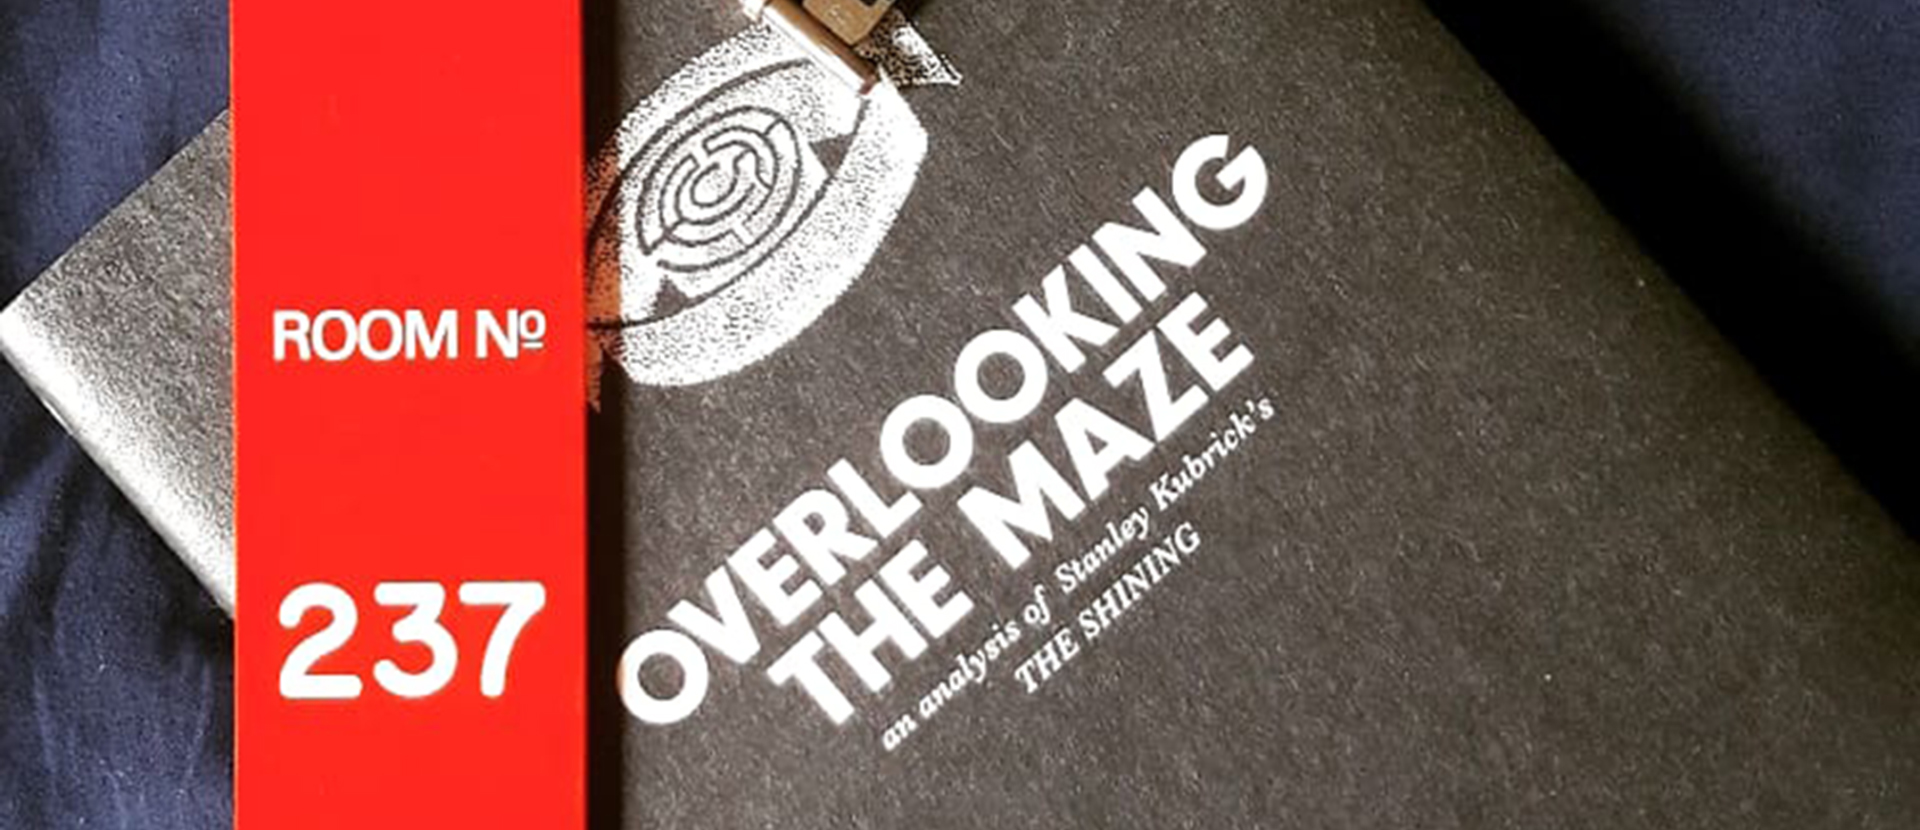 The front cover of Jake's book 'Overlooking the Maze'